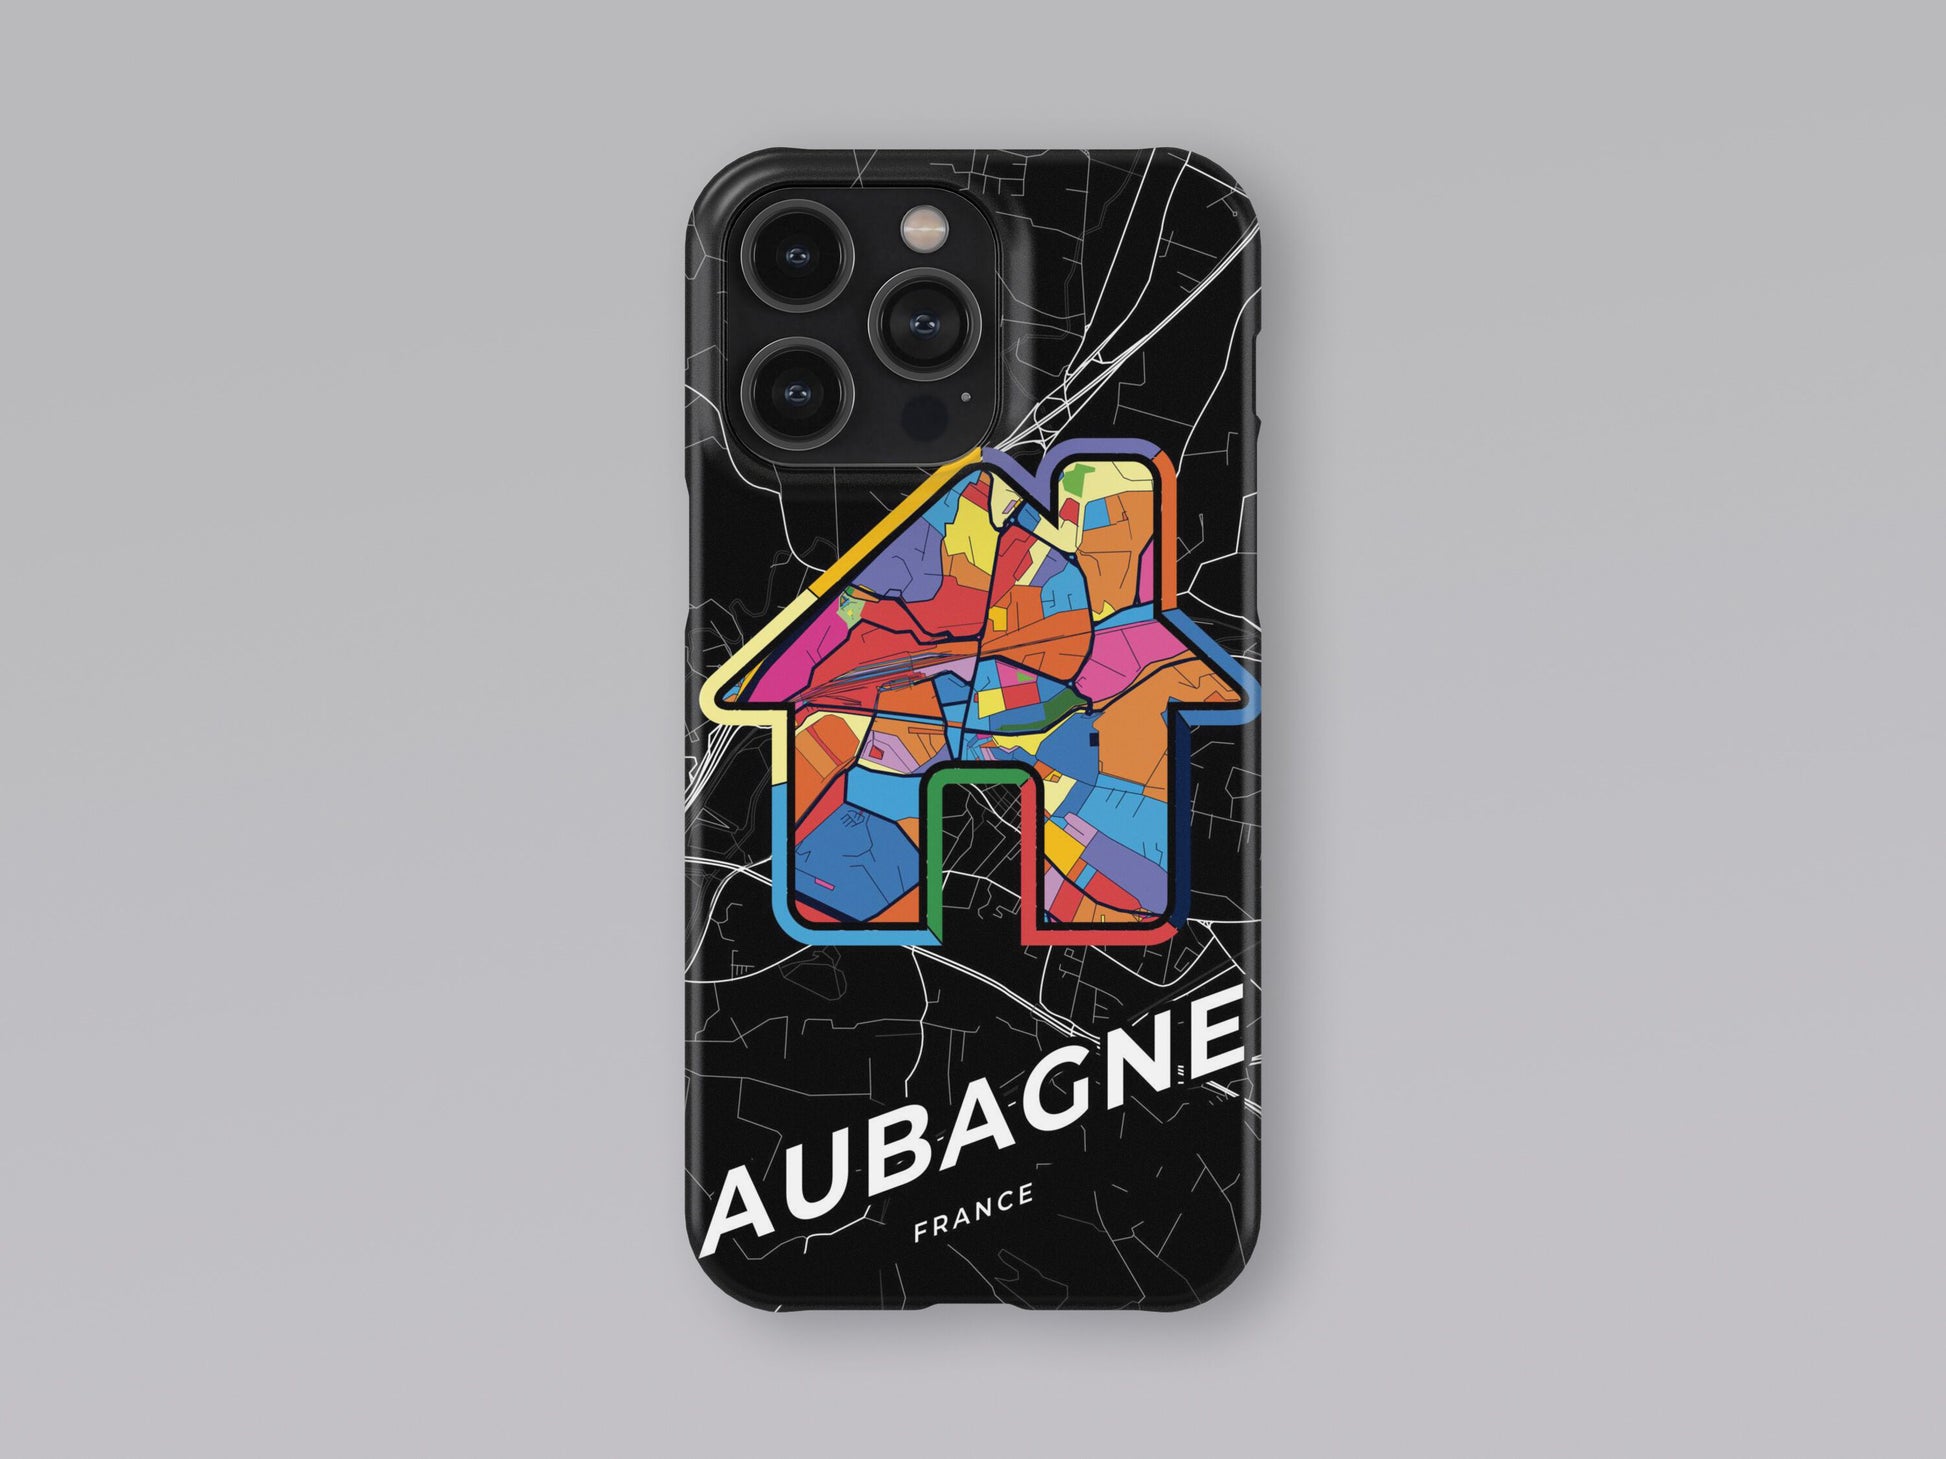 Aubagne France slim phone case with colorful icon. Birthday, wedding or housewarming gift. Couple match cases. 3